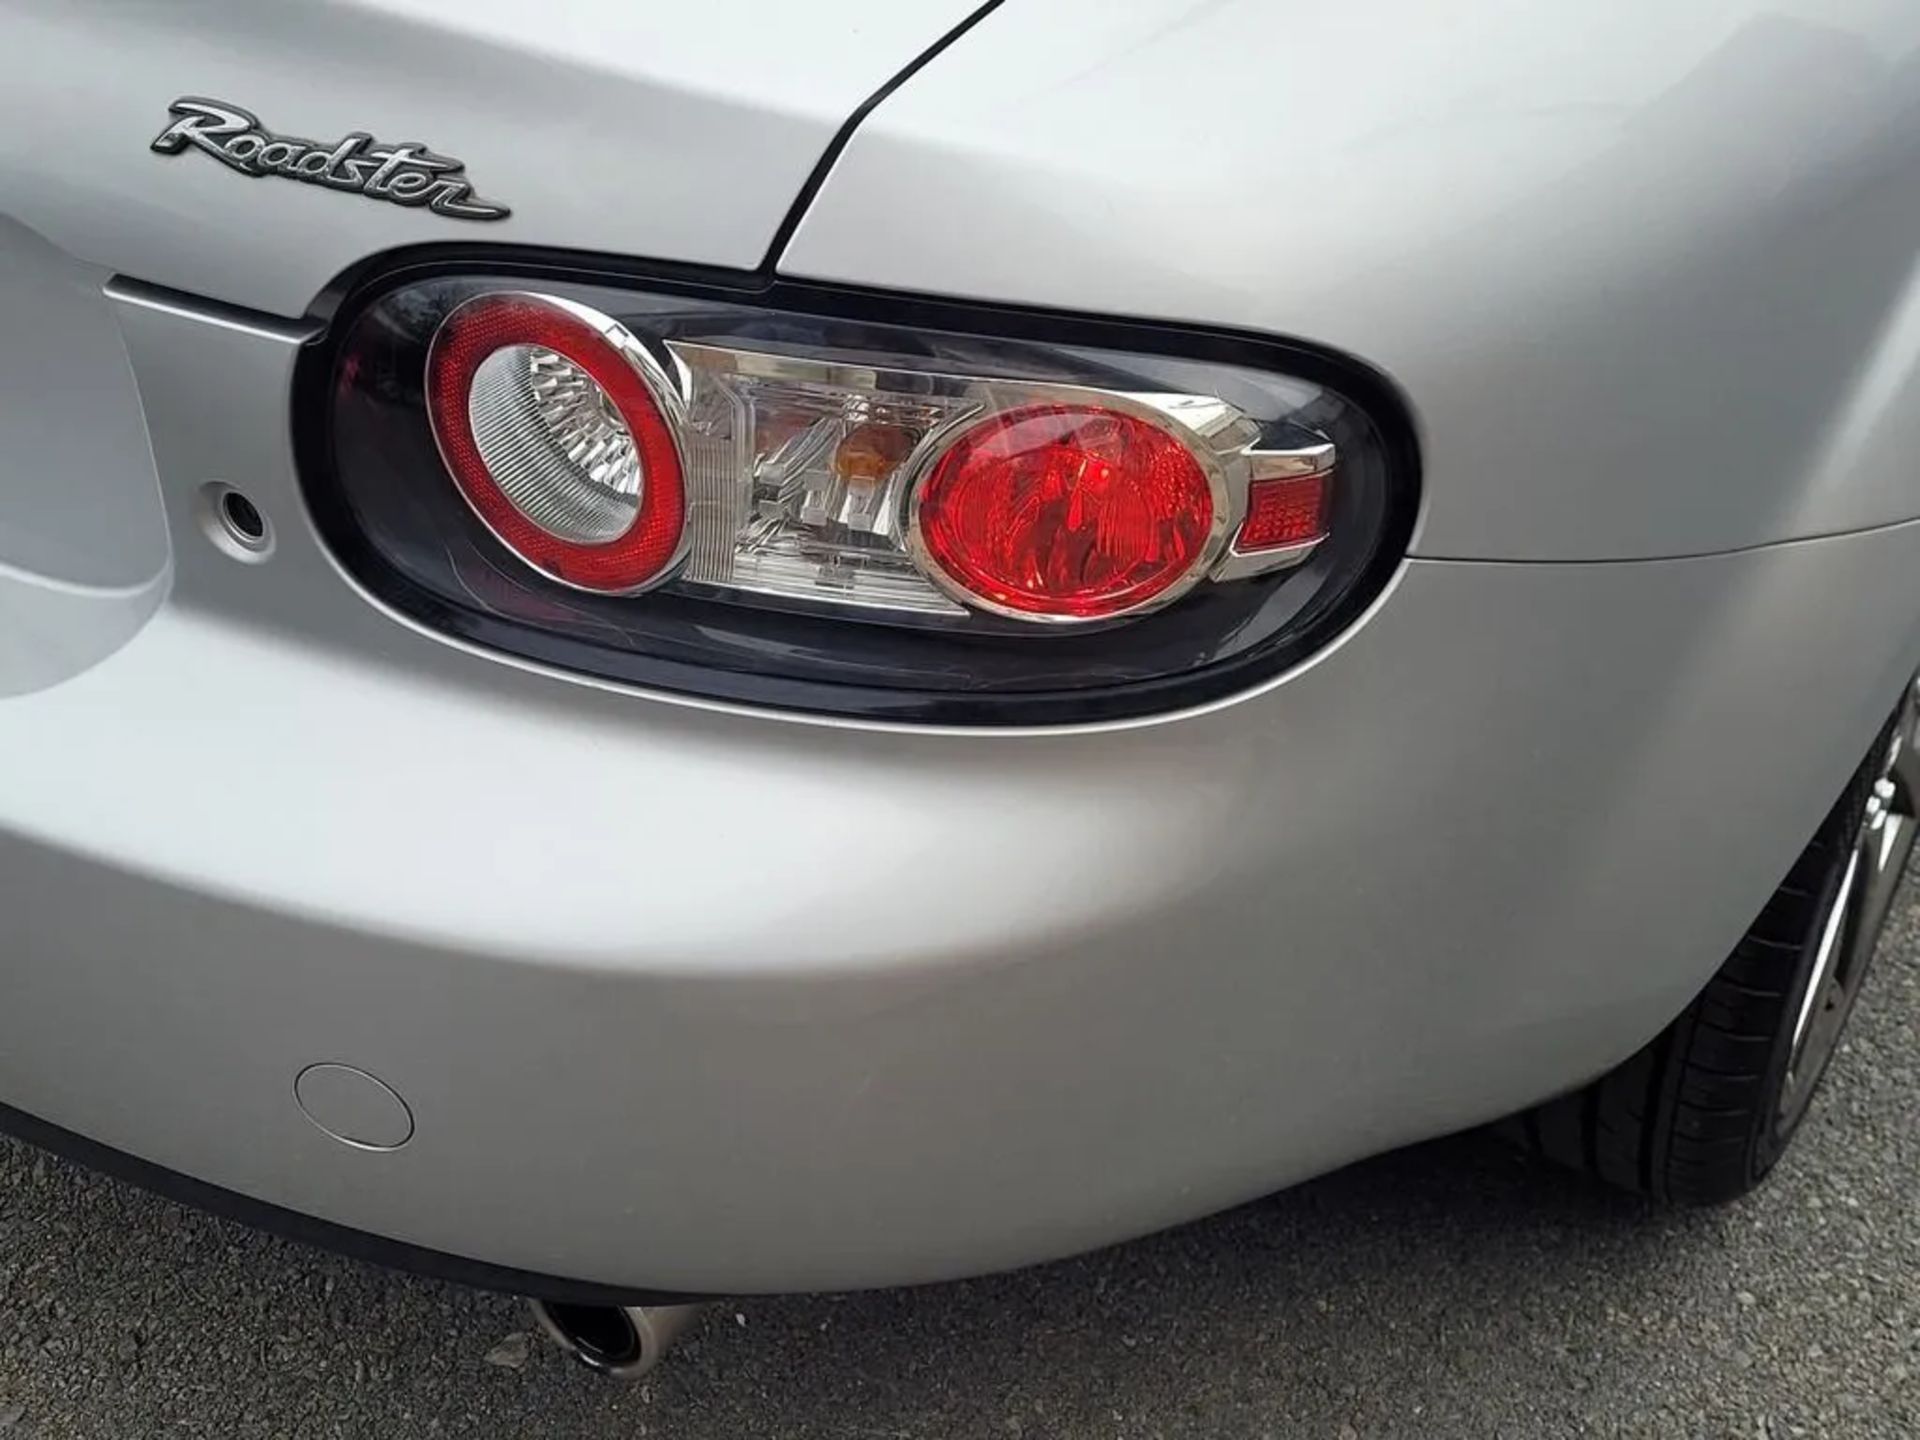 2007 Mazda MX-5 Roadster Freshly Imported From Tokyo Japan. - Image 17 of 20